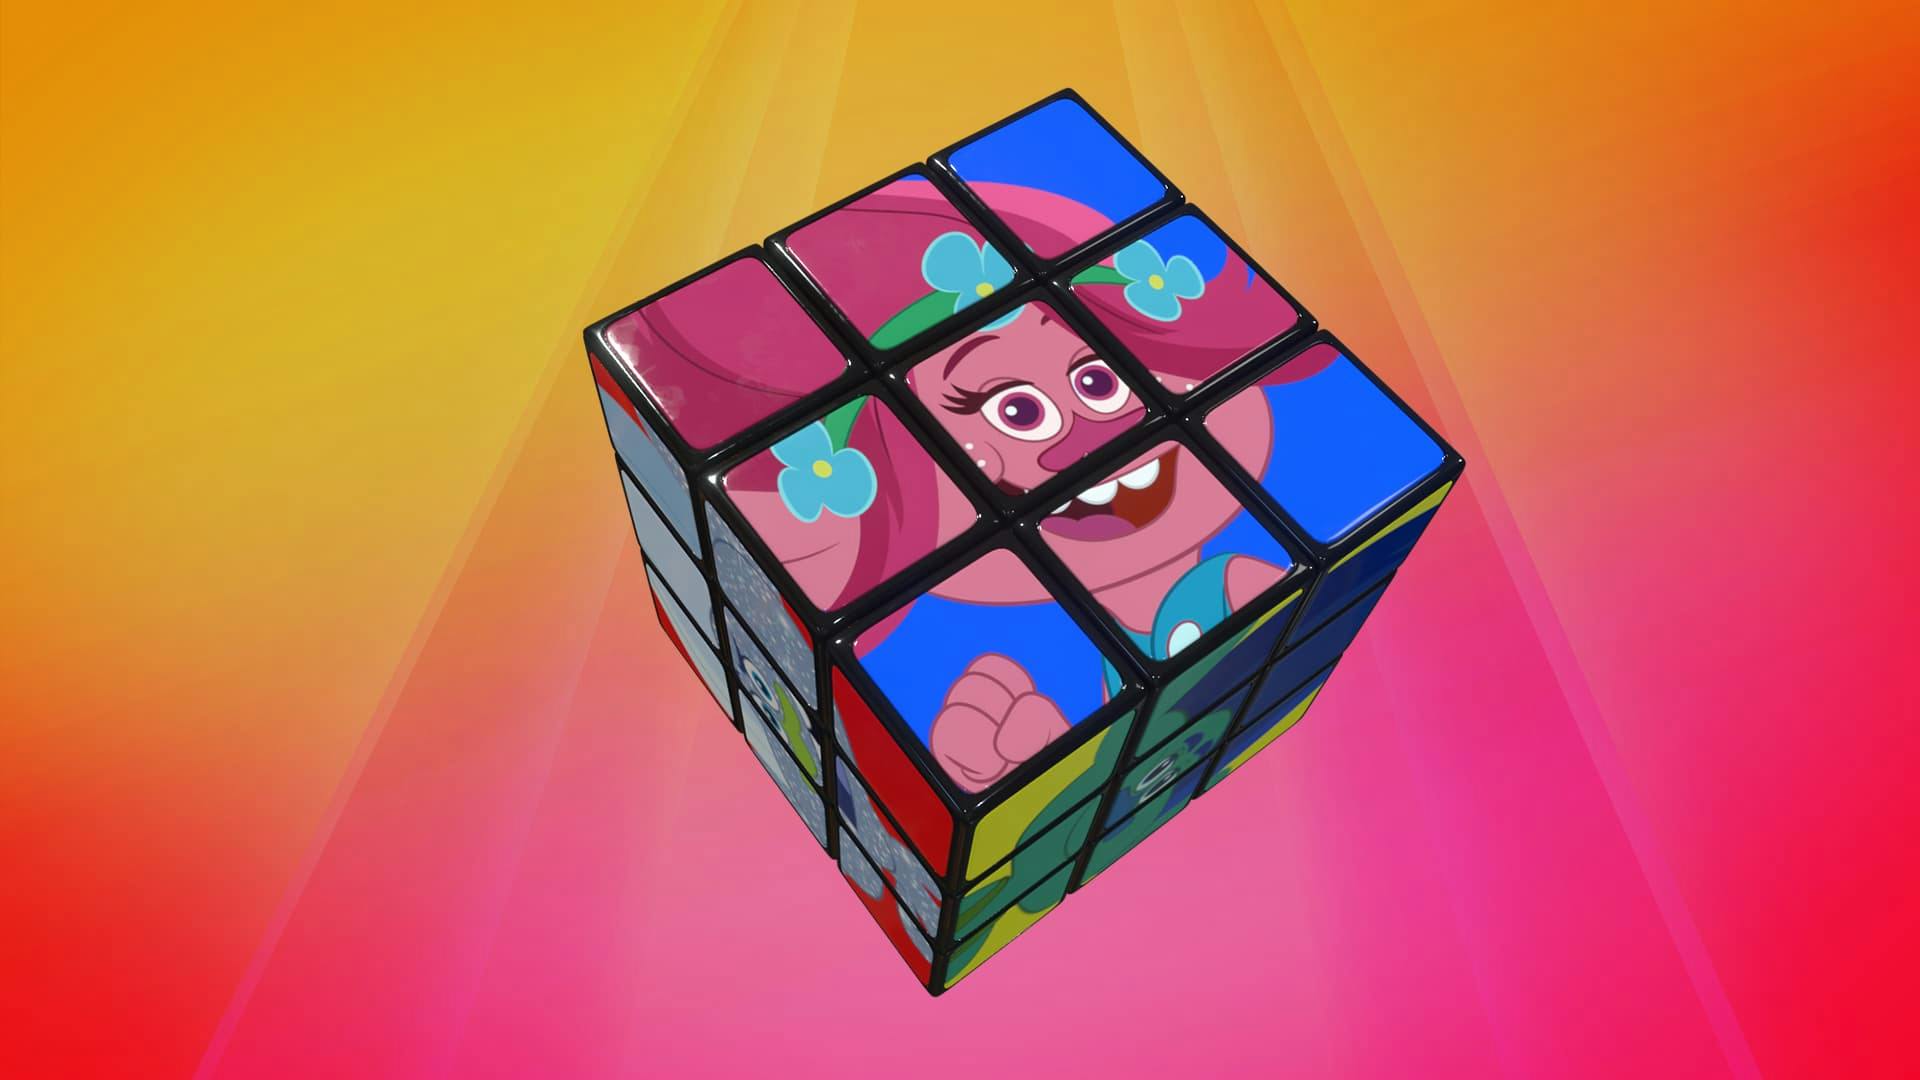 A rubiks cube sits in front of a colourful background, the faces of the cube have popular characters from the DreamWorks TV show Trolls.